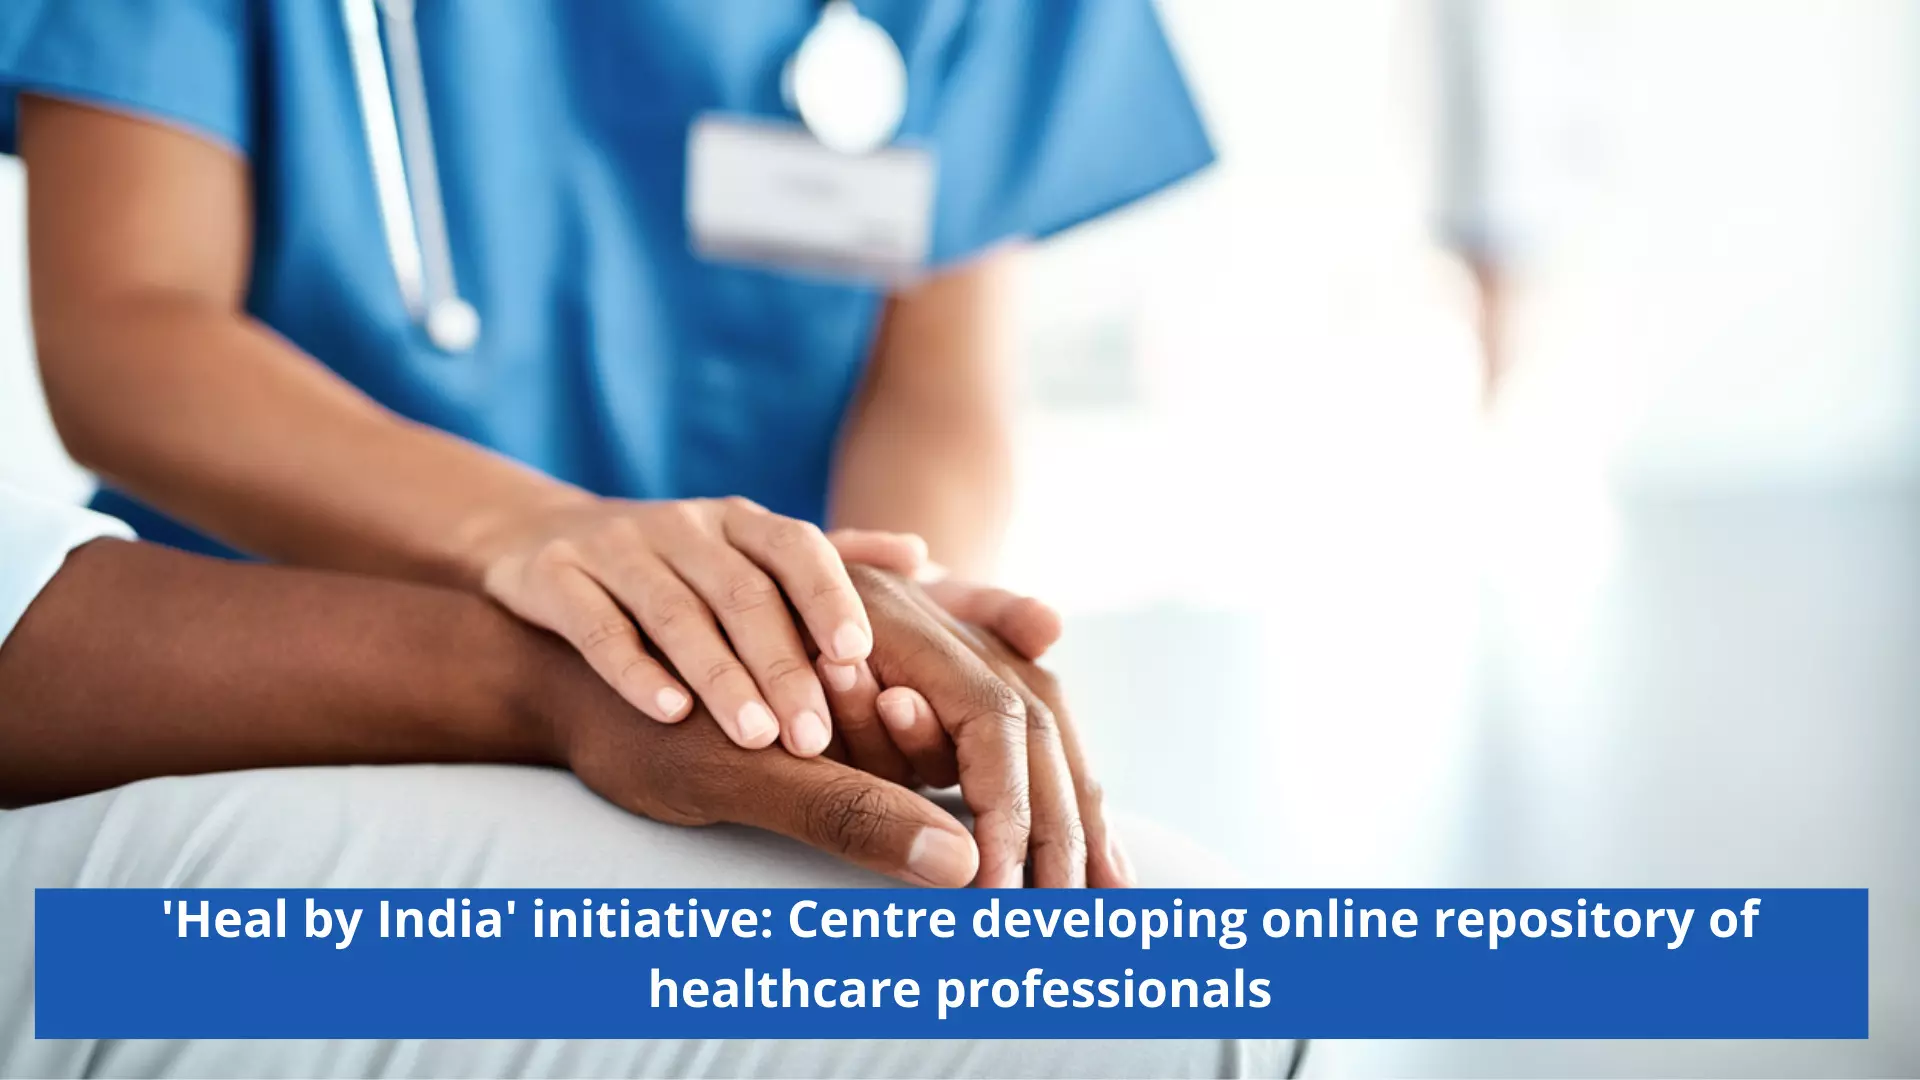 Heal by India initiative: Govt developing online repository of healthcare professionals